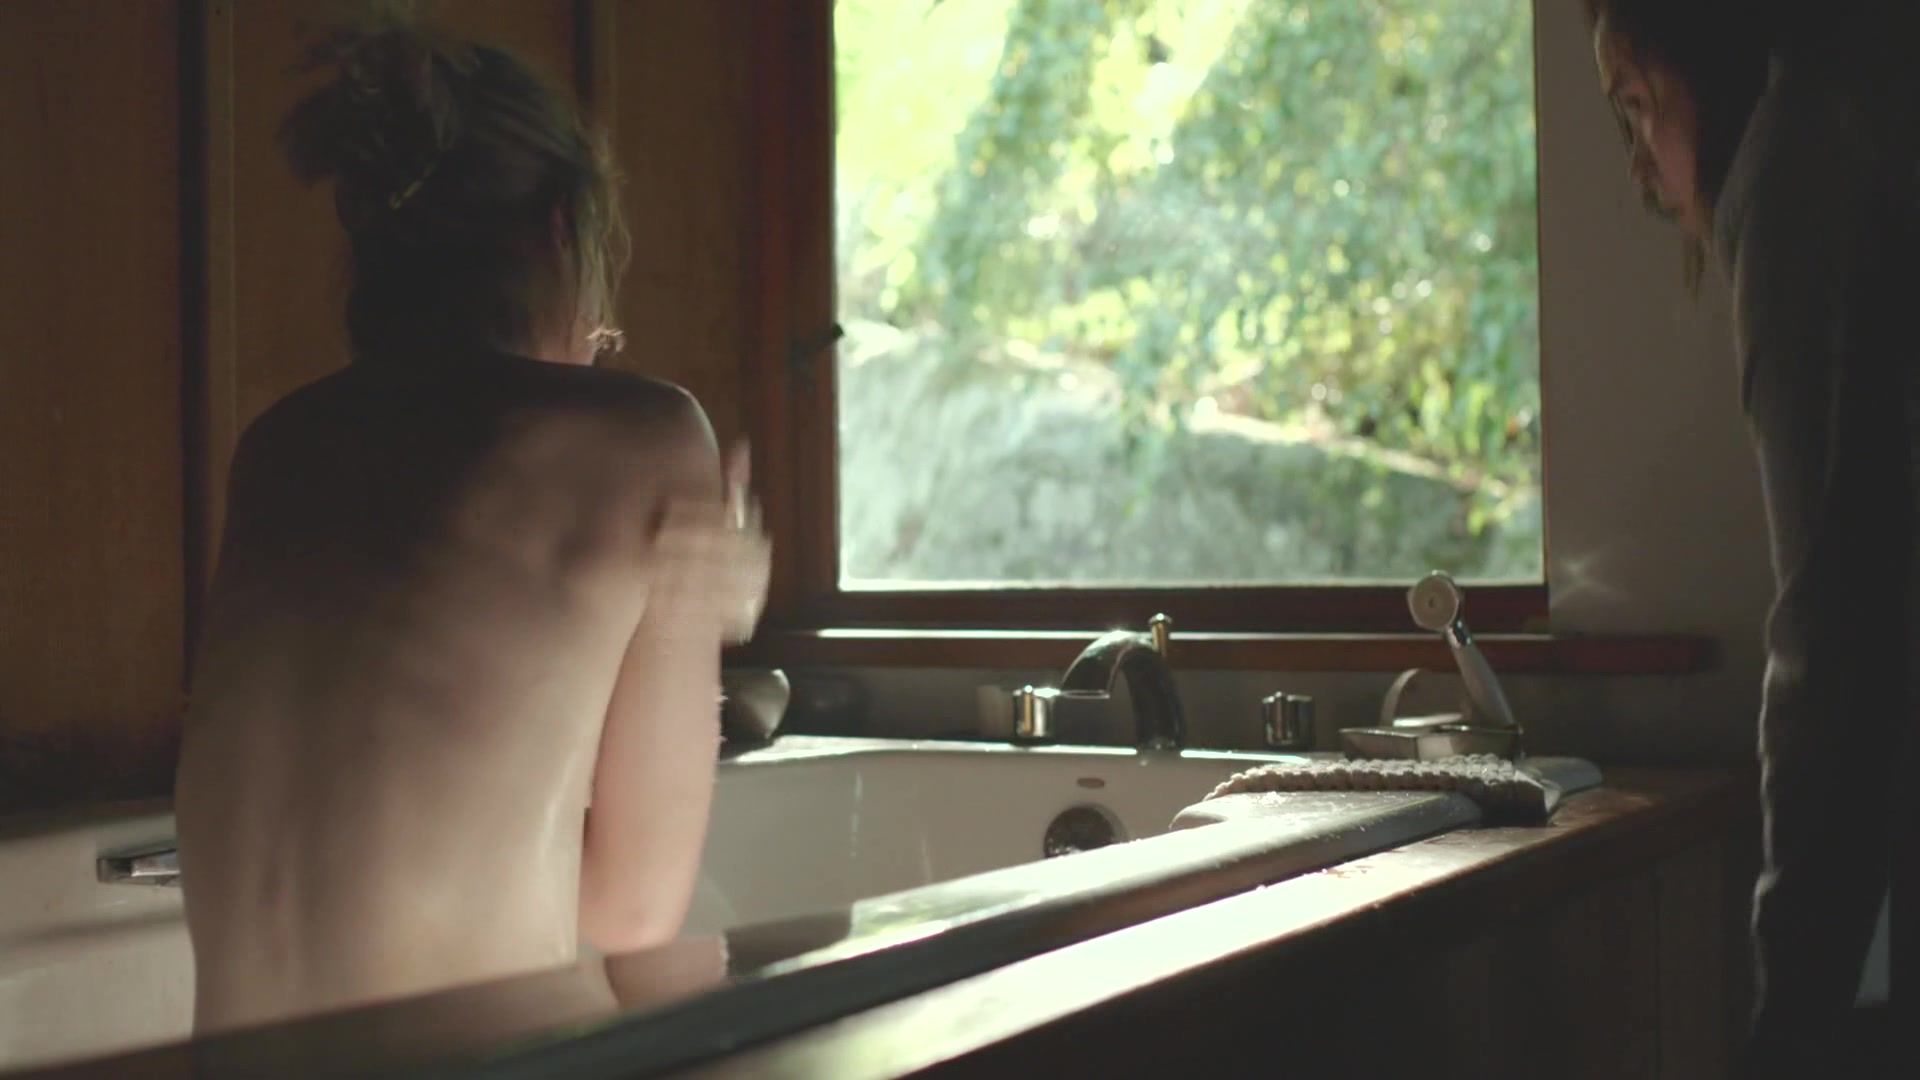 Spying Celebs nude scene | Ellen Page, Evan Rachel Wood - Into The Forest (2015) Old Young